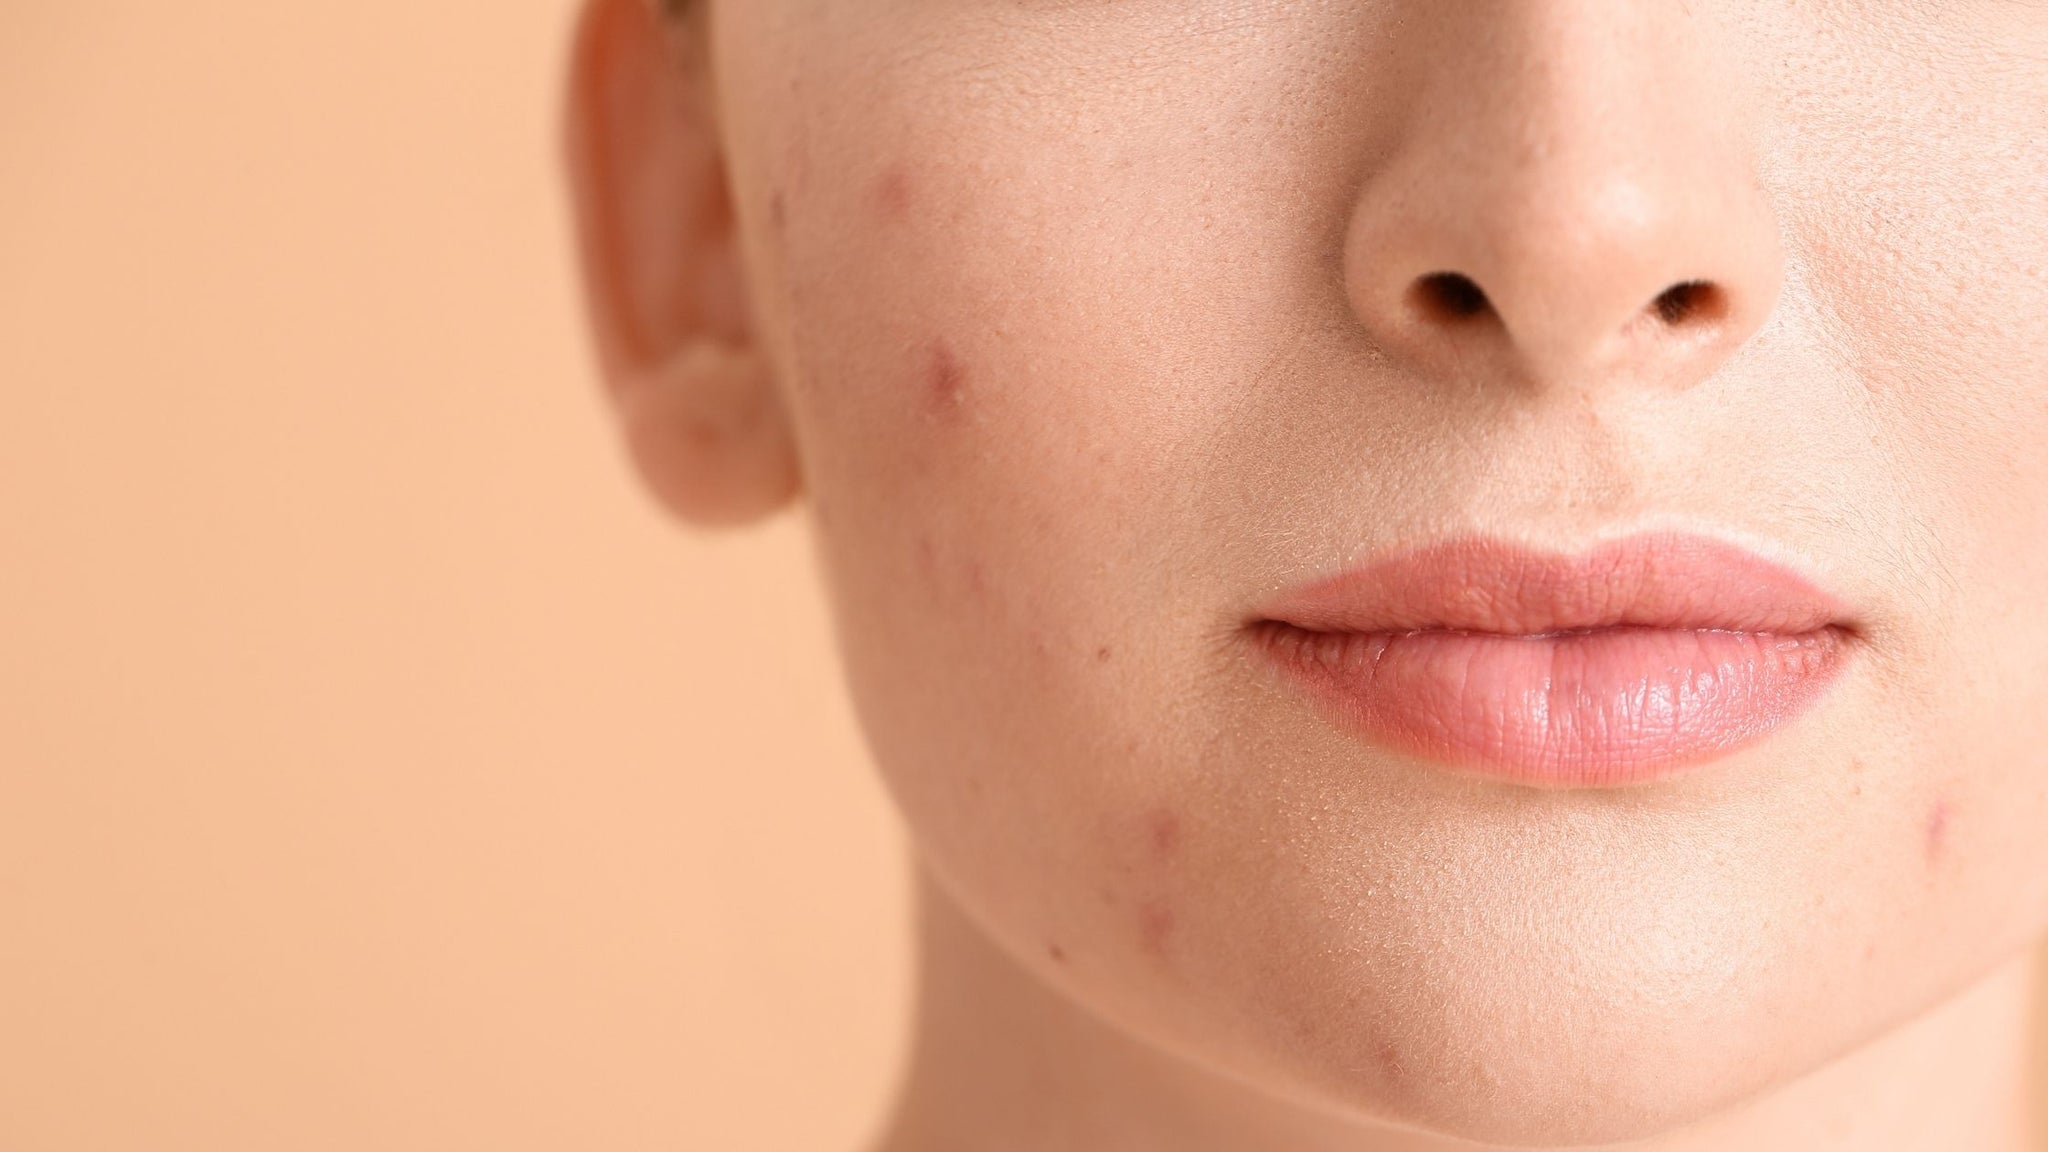 Spot Treatment for acne: How it usually works